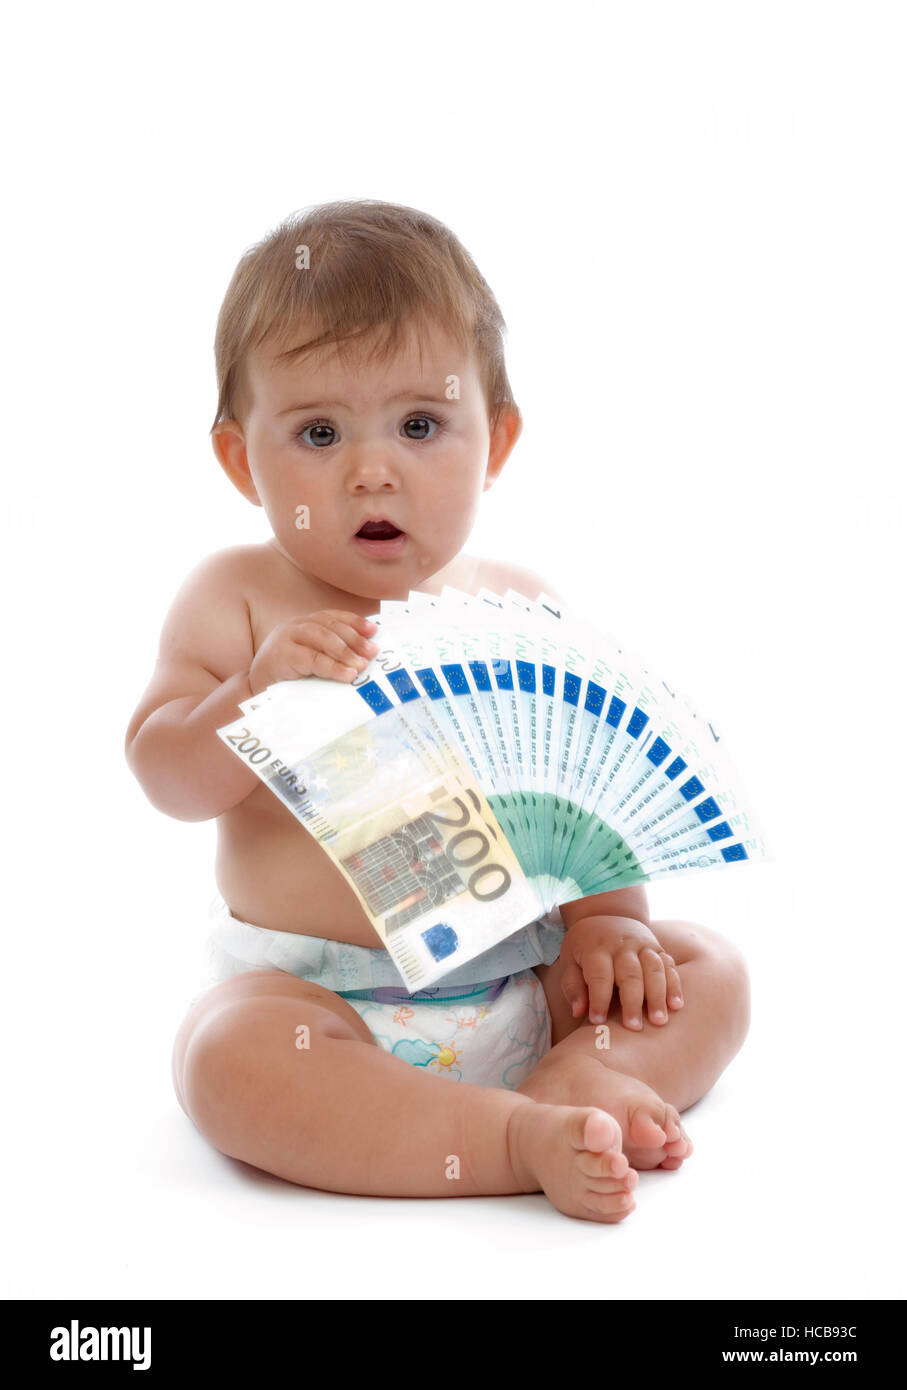 Young child with banknotes, symbolic picture for child benefits Stock Photo